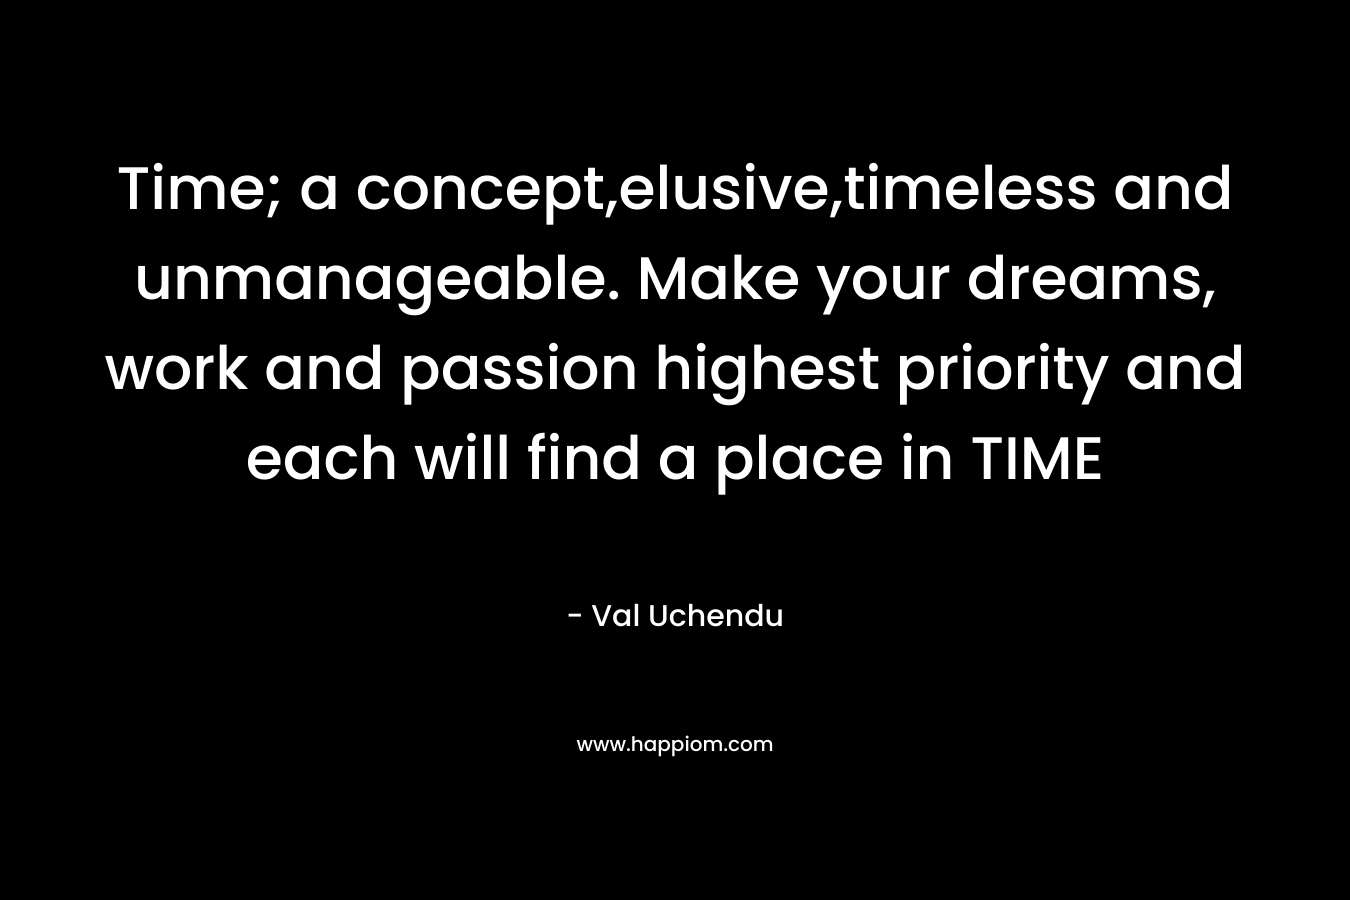 Time; a concept,elusive,timeless and unmanageable. Make your dreams, work and passion highest priority and each will find a place in TIME